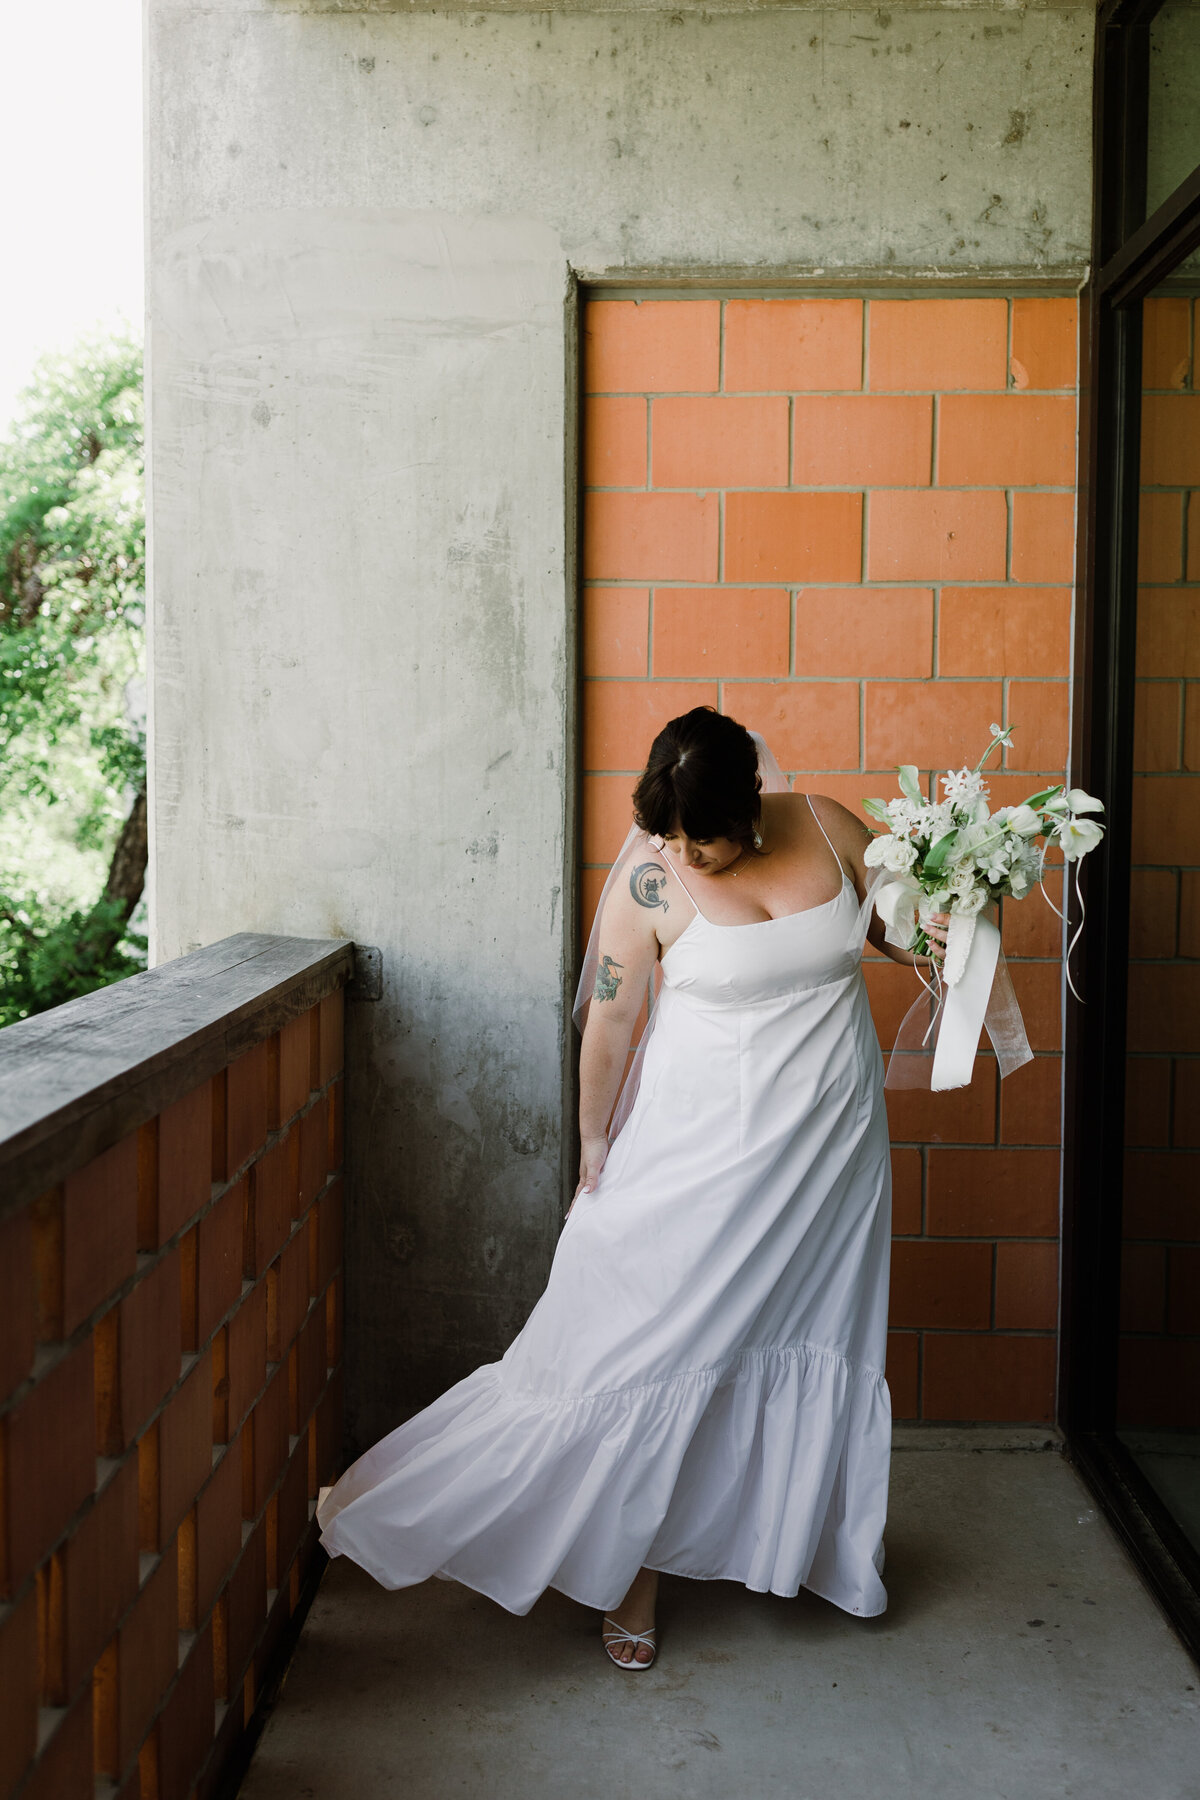 Bride wearing white gown holding bouquet of white florals